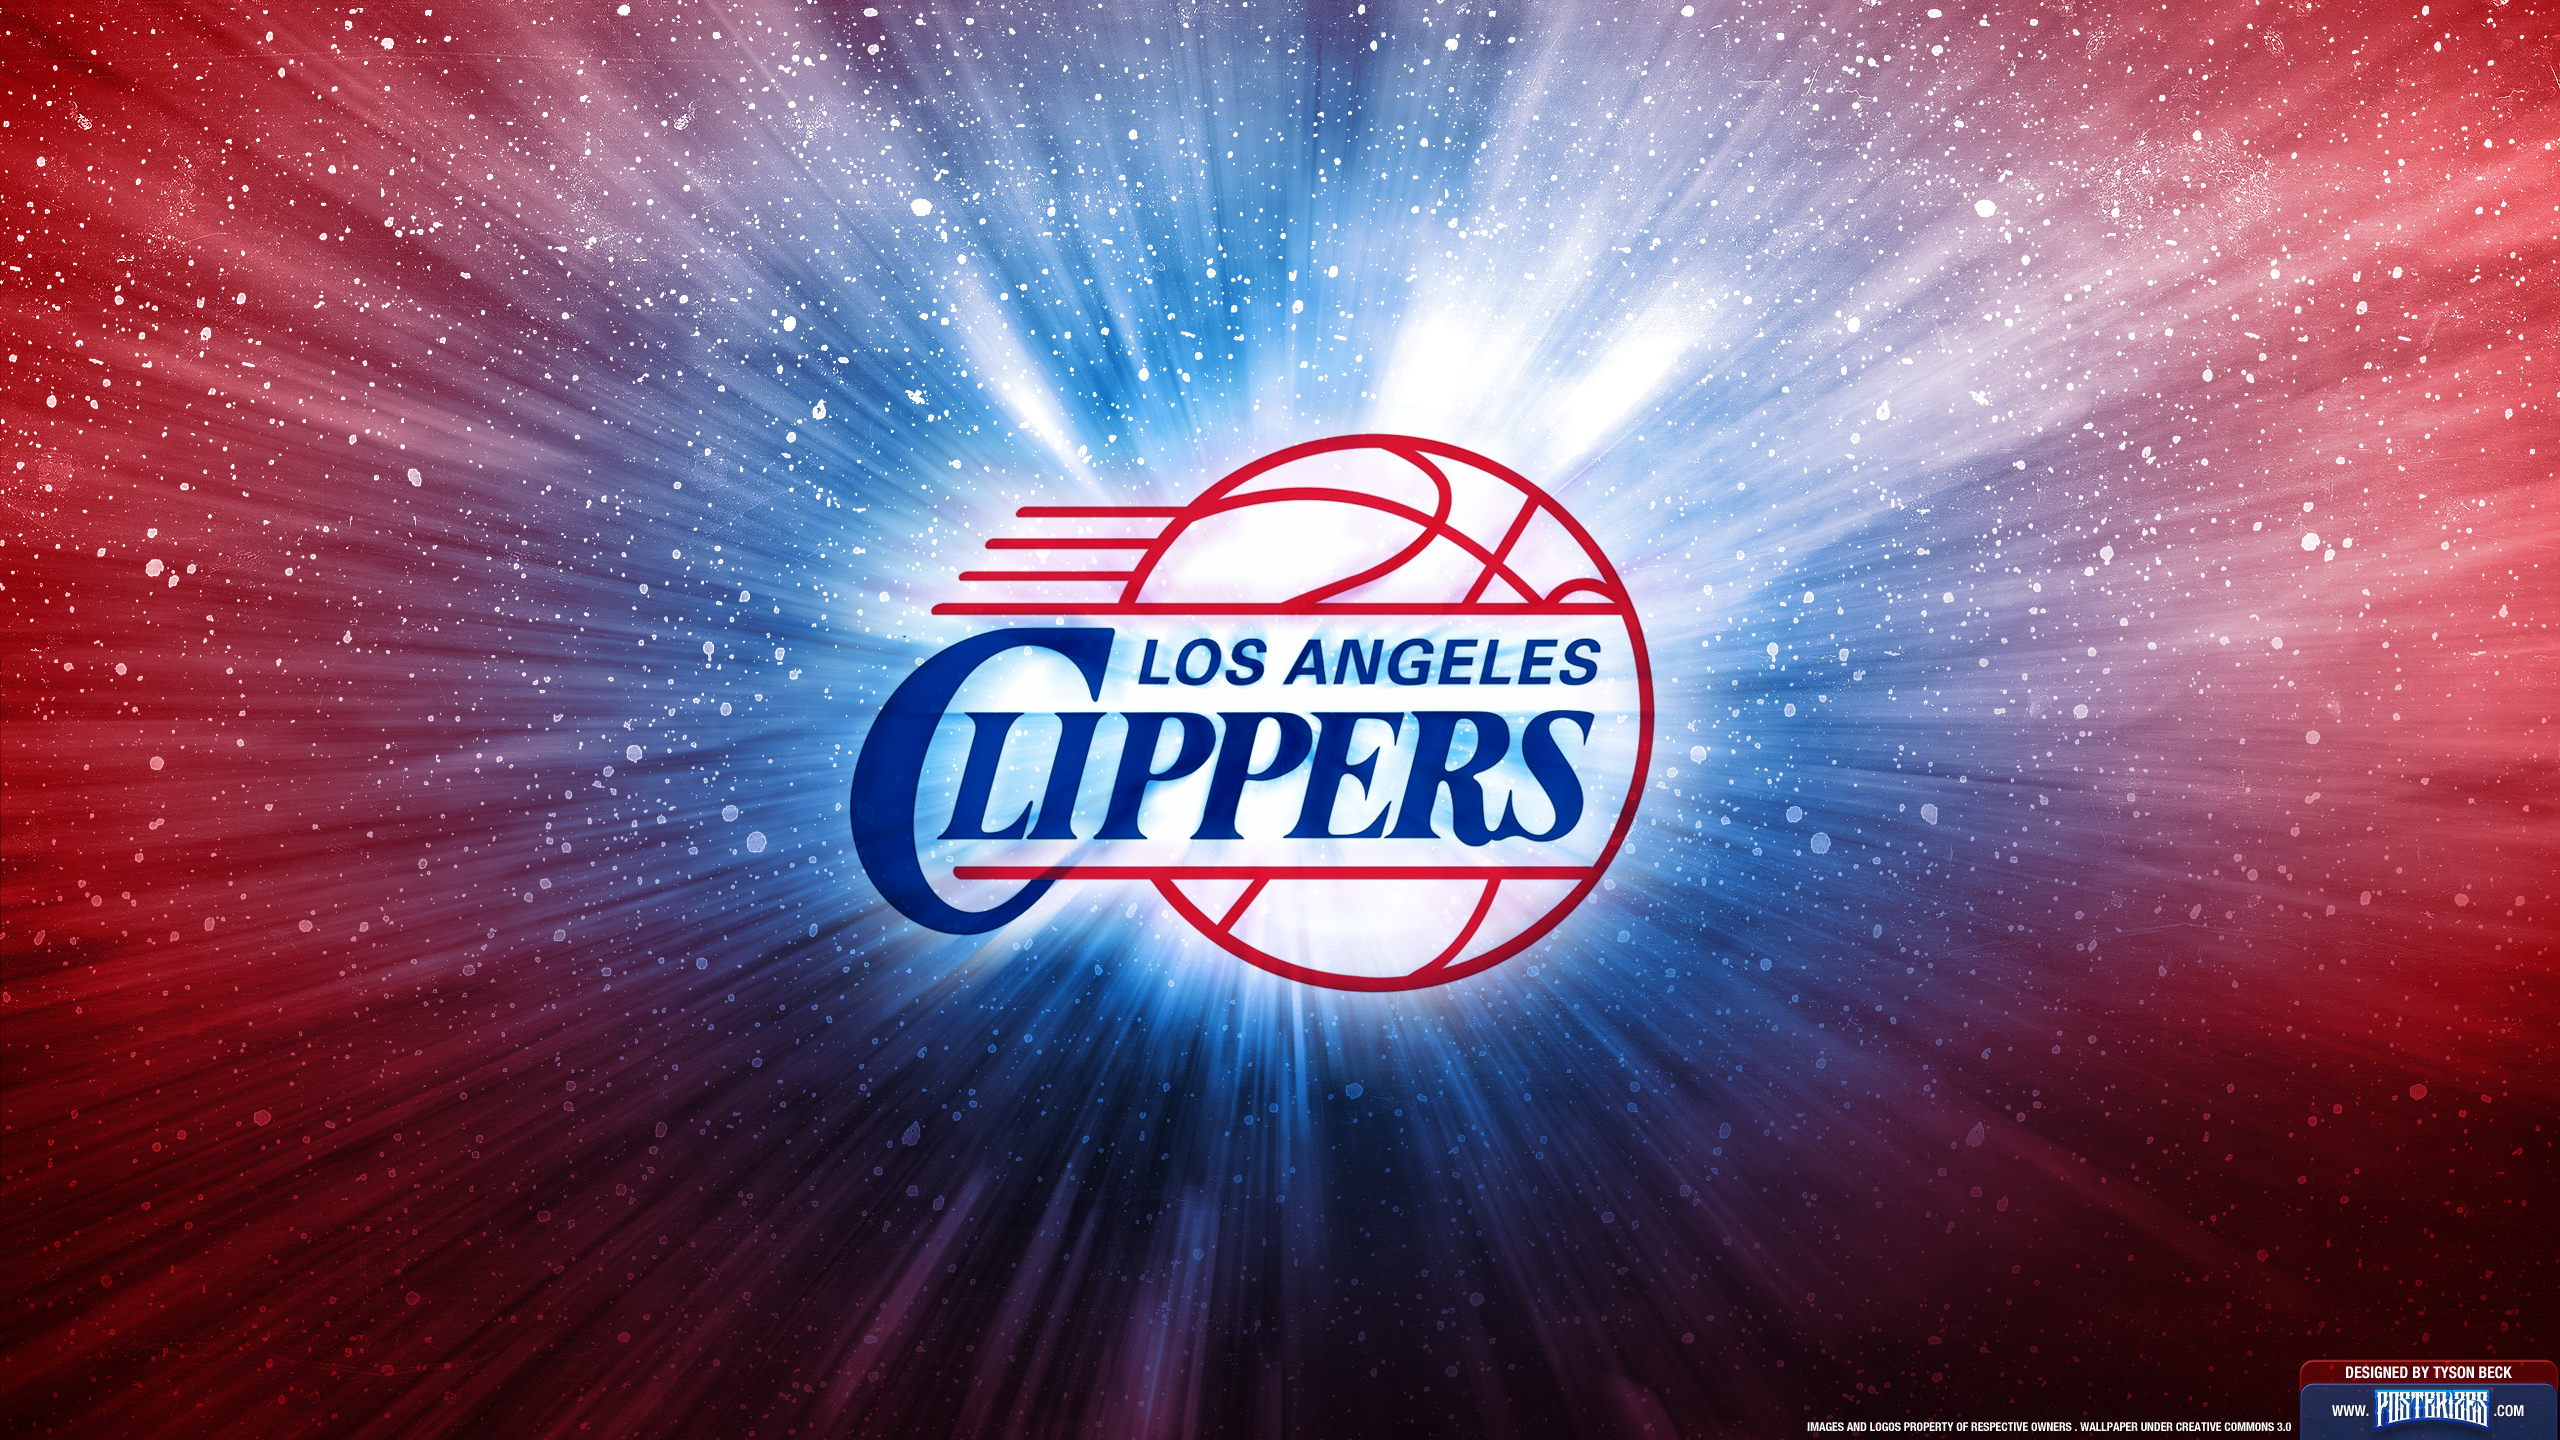 Clippers Meaning and Definition